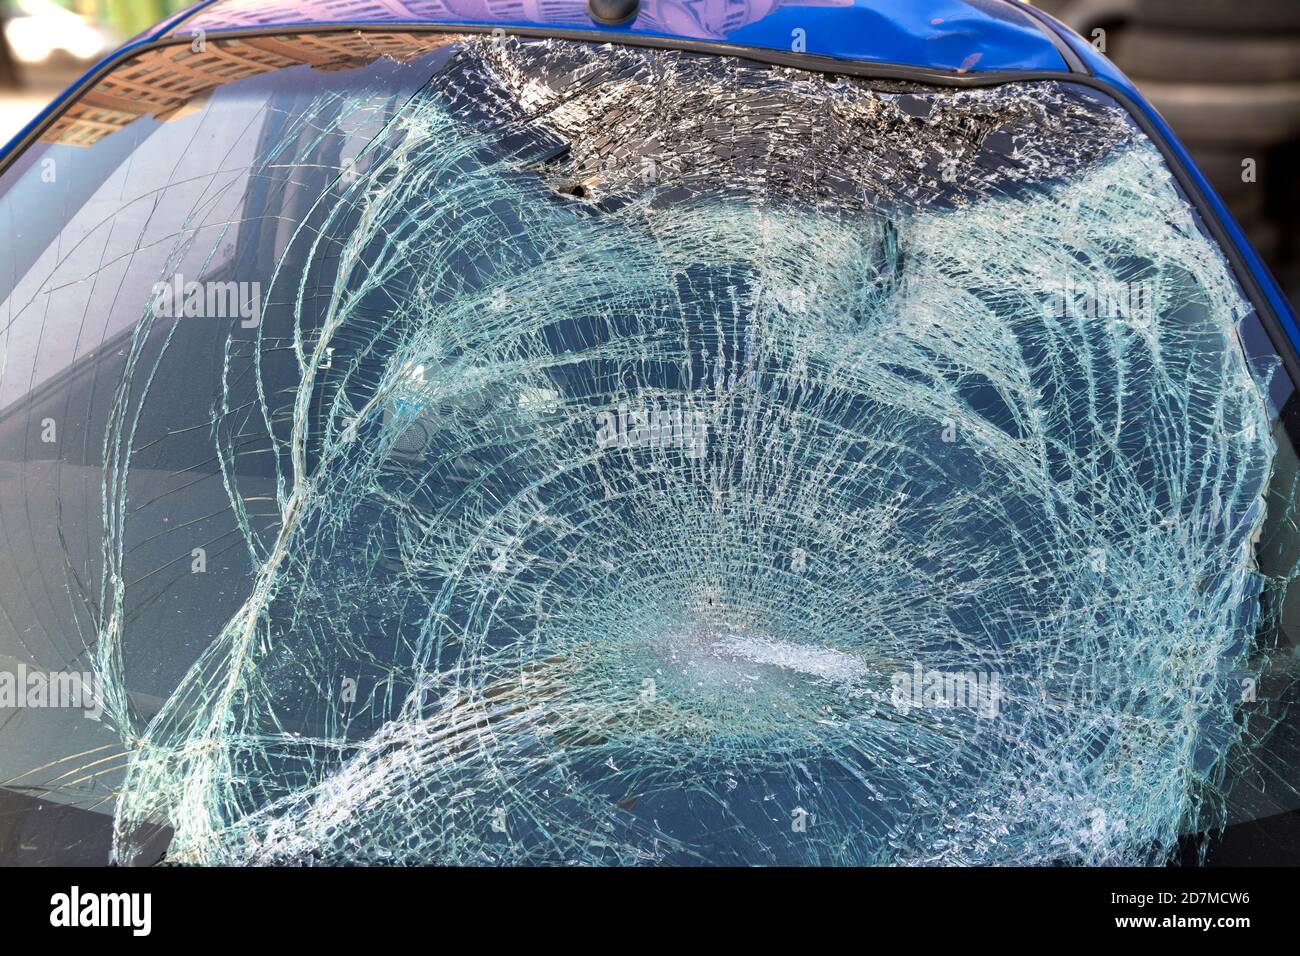 a blue car with a damaged windshield in a traffic accident. Stock Photo